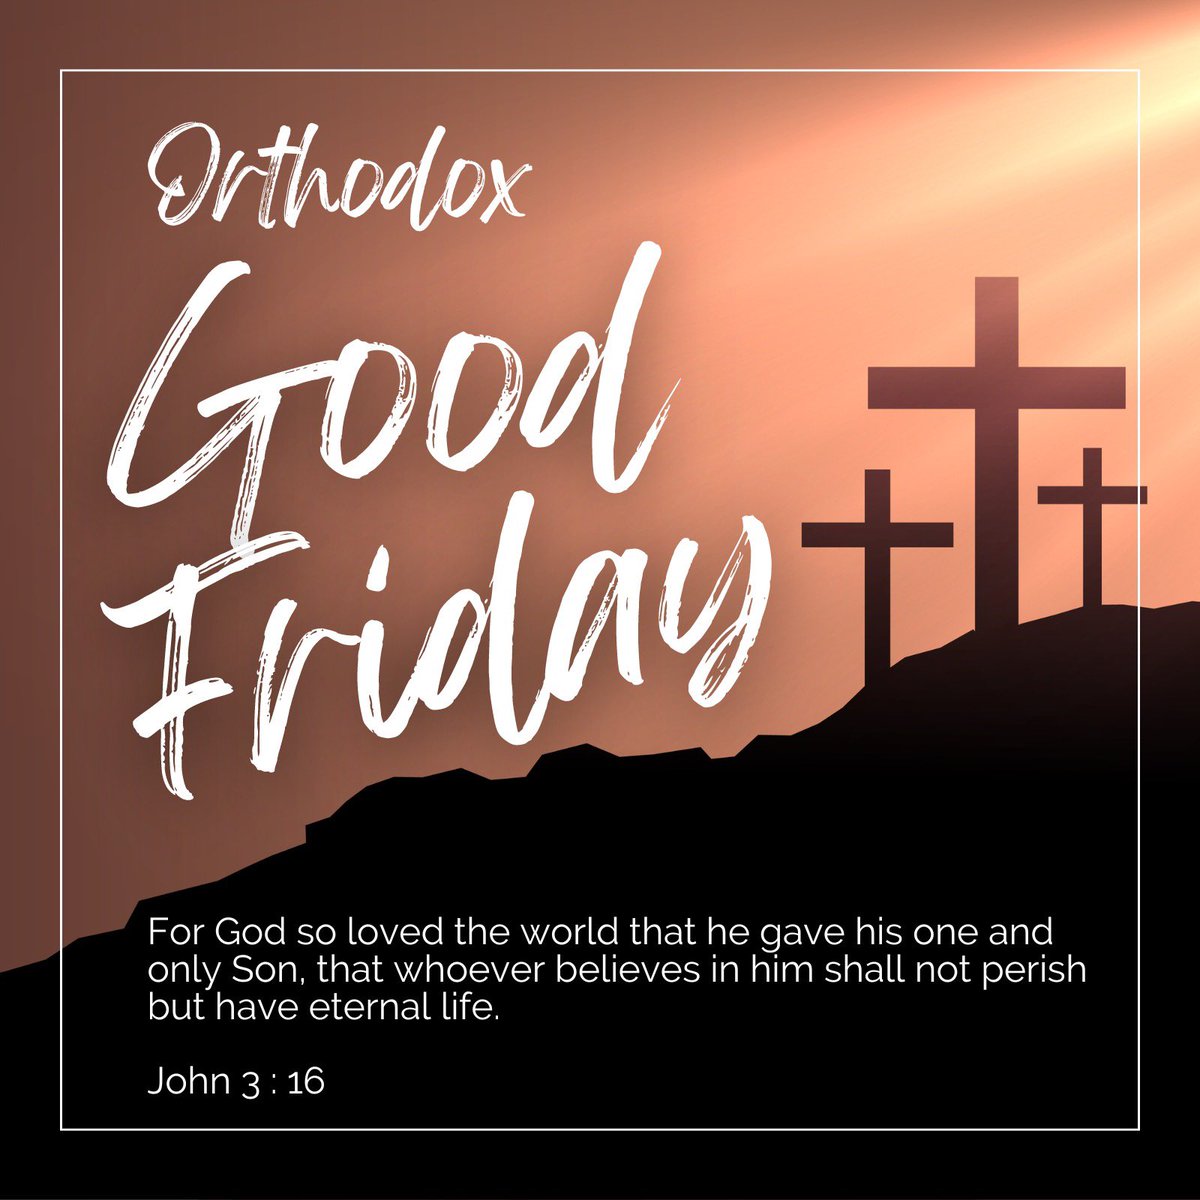 Wishing Orthodox Christians a solemn and reflective Good Friday as they commemorate the crucifixion of Jesus Christ.